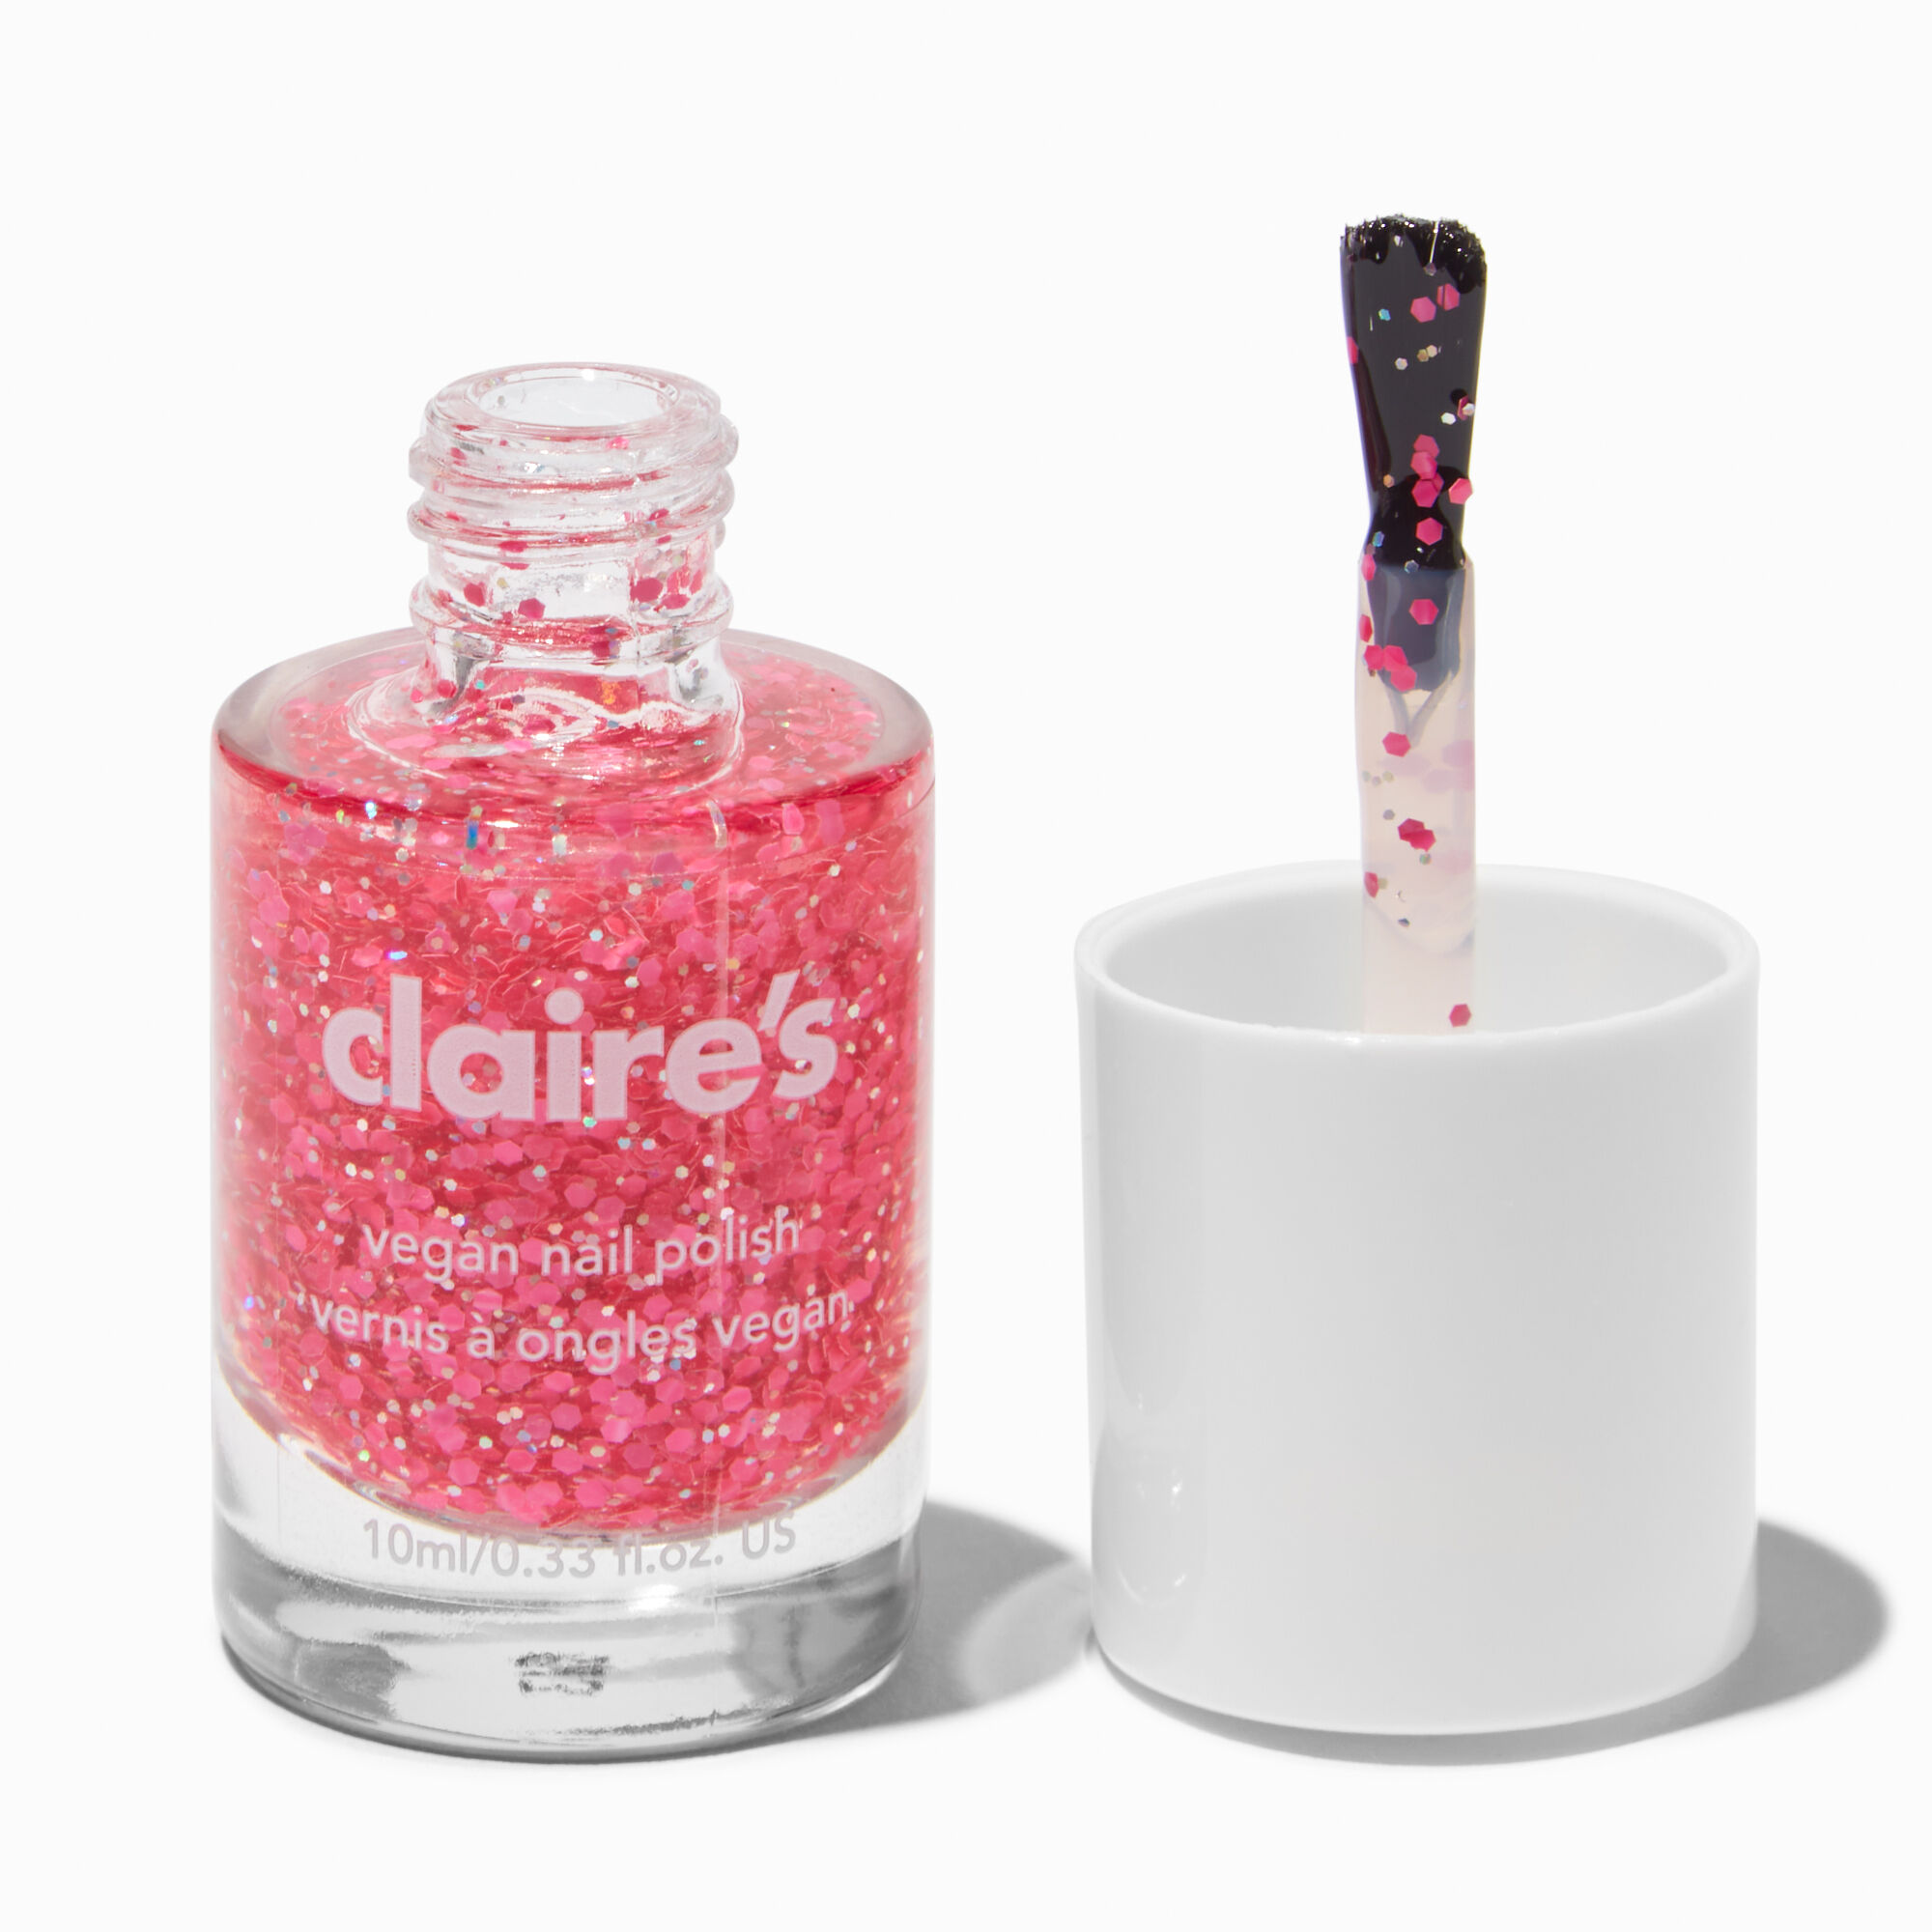 View Claires Vegan Glitter Nail Polish On Stage information